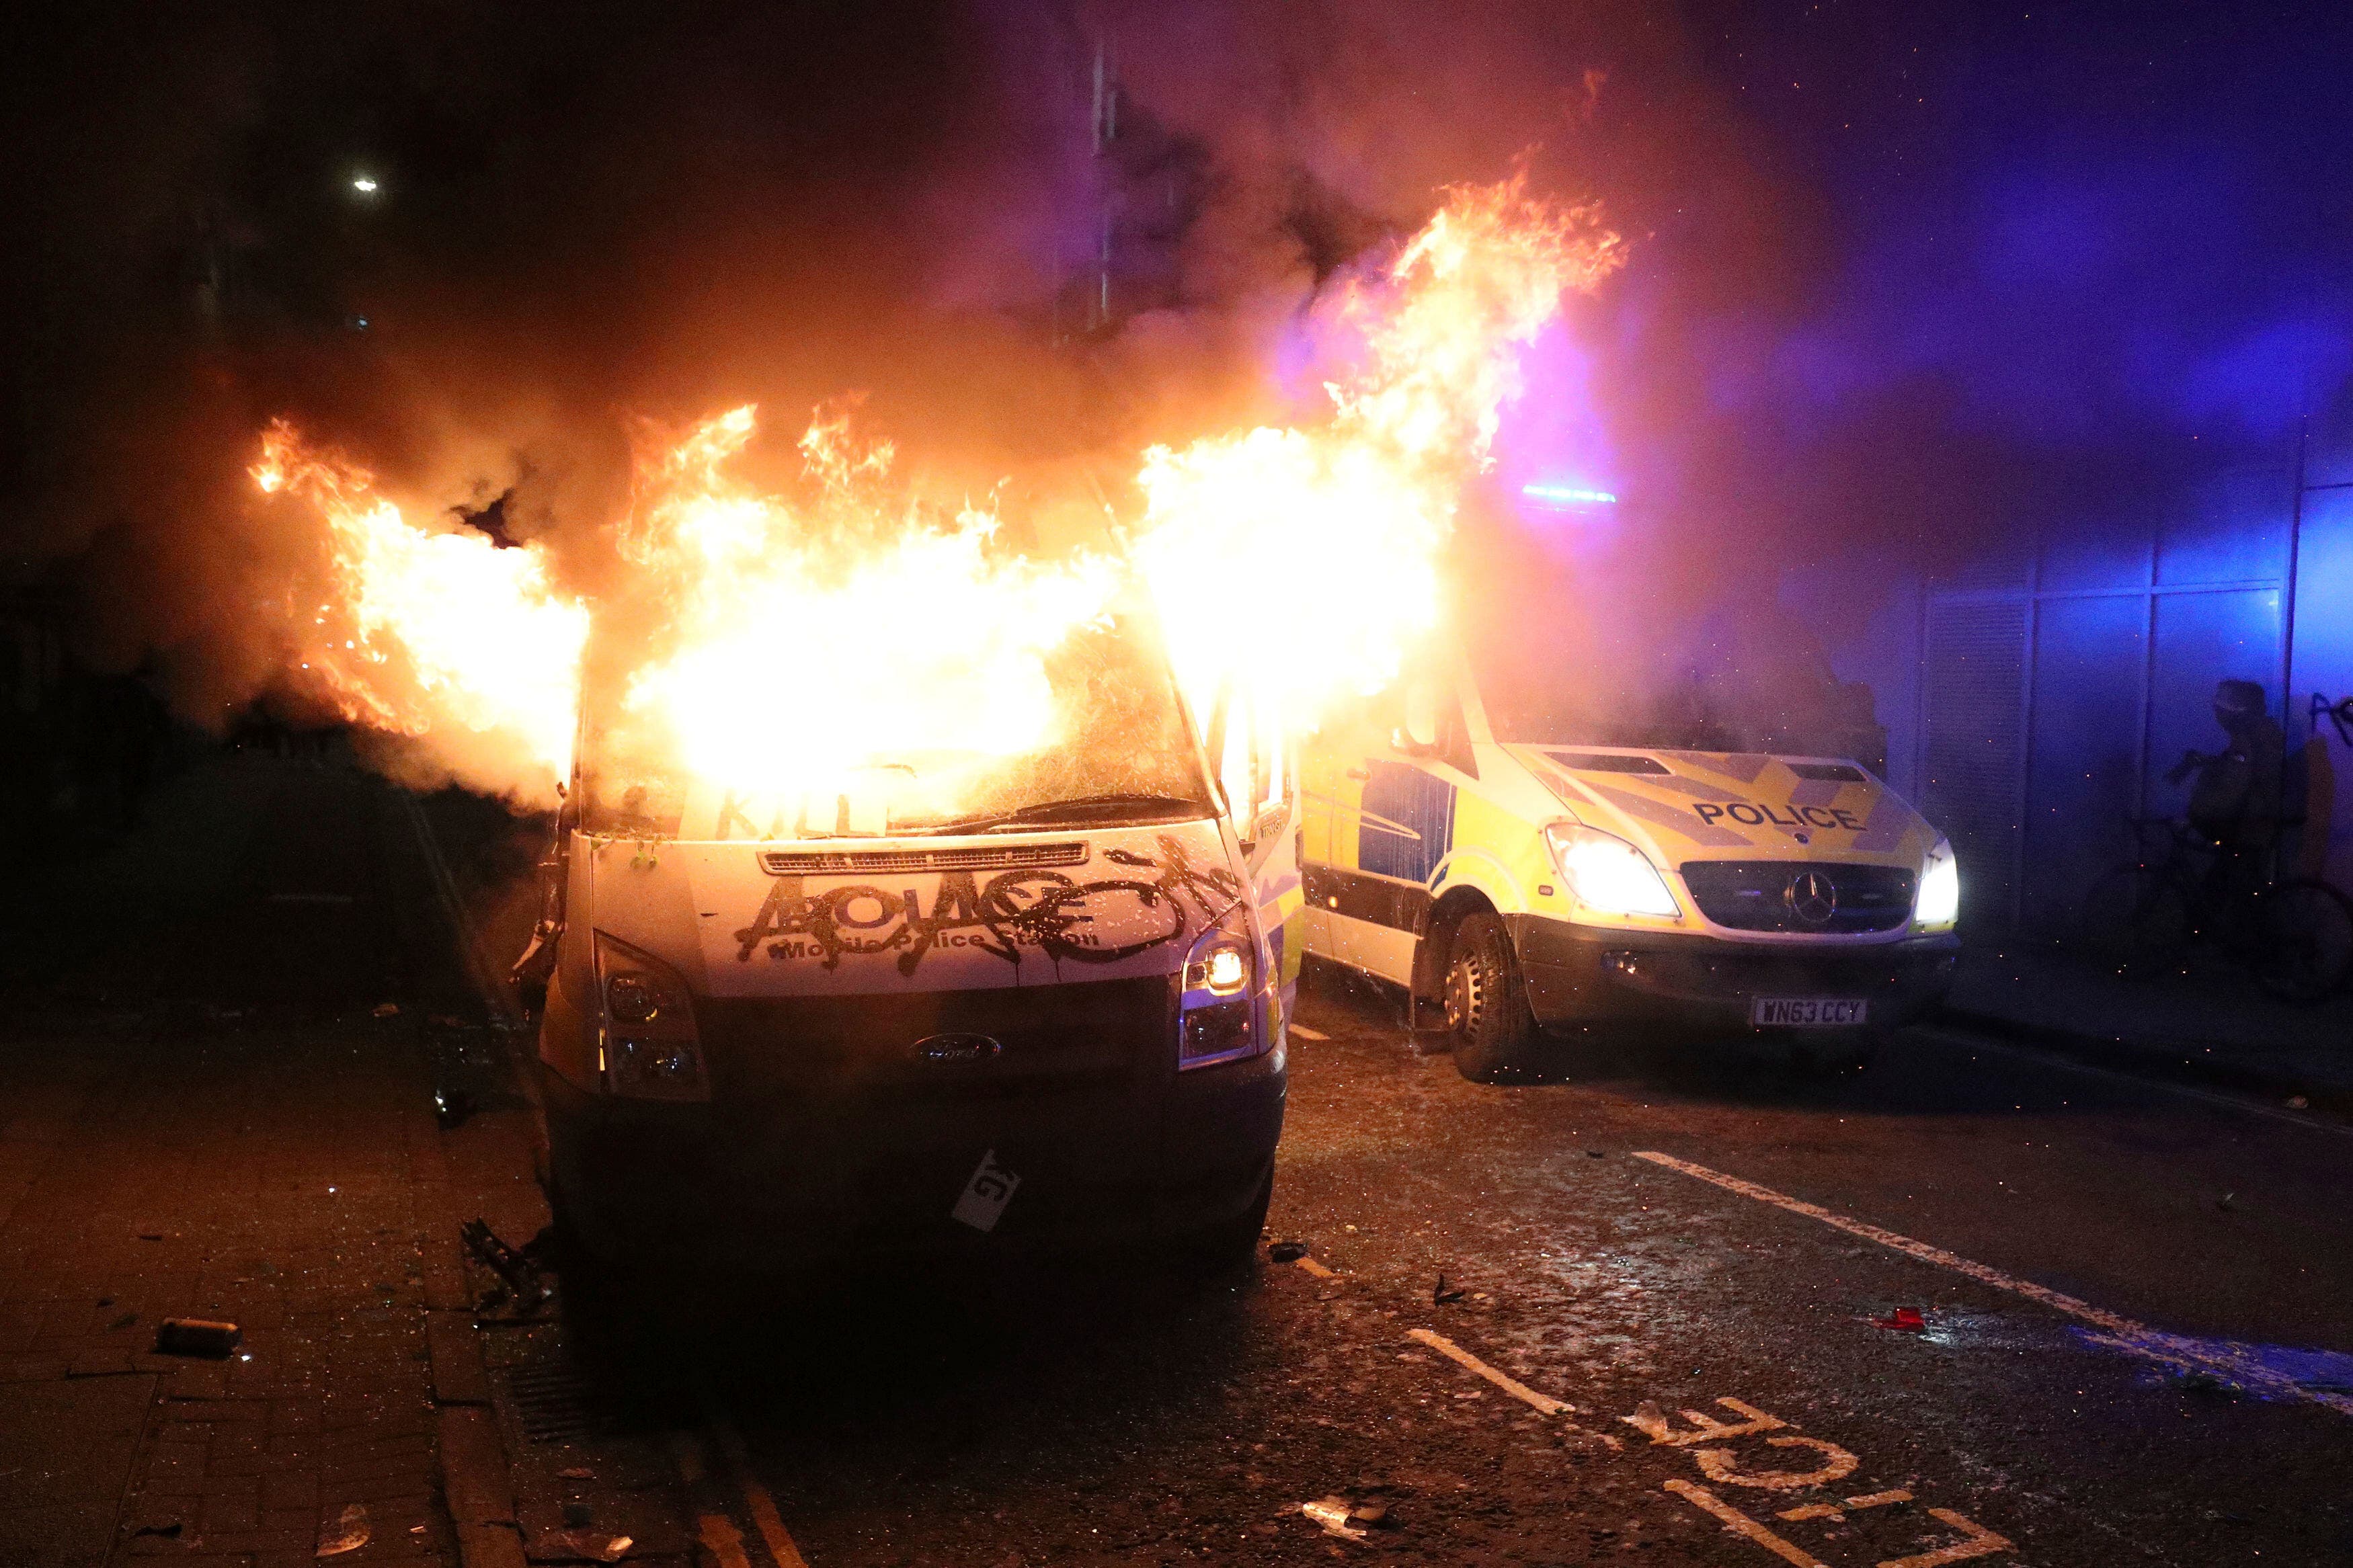 Police officers injured, vehicles set on fire during violent rally in Bristol, England